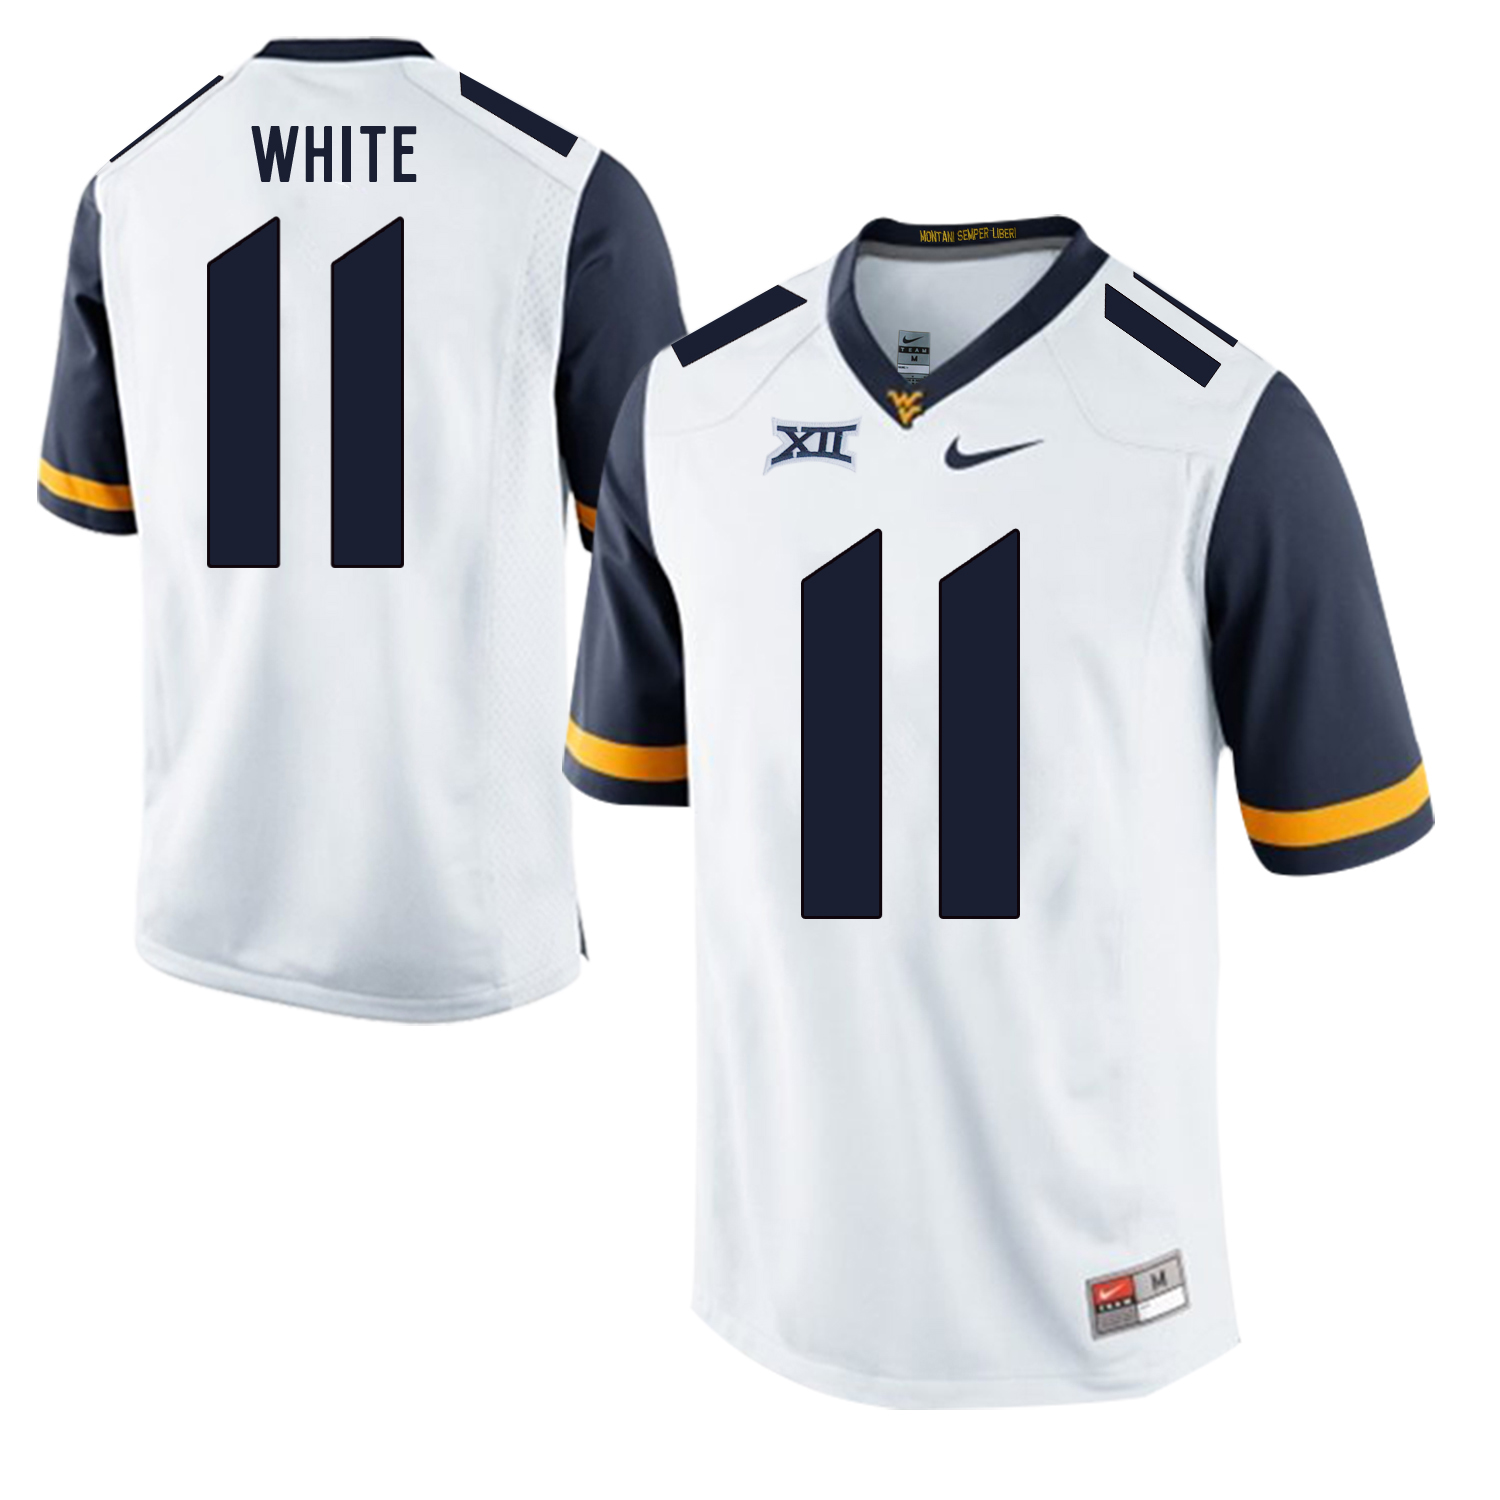 West Virginia Mountaineers 11 Kevin White White College Football Jersey